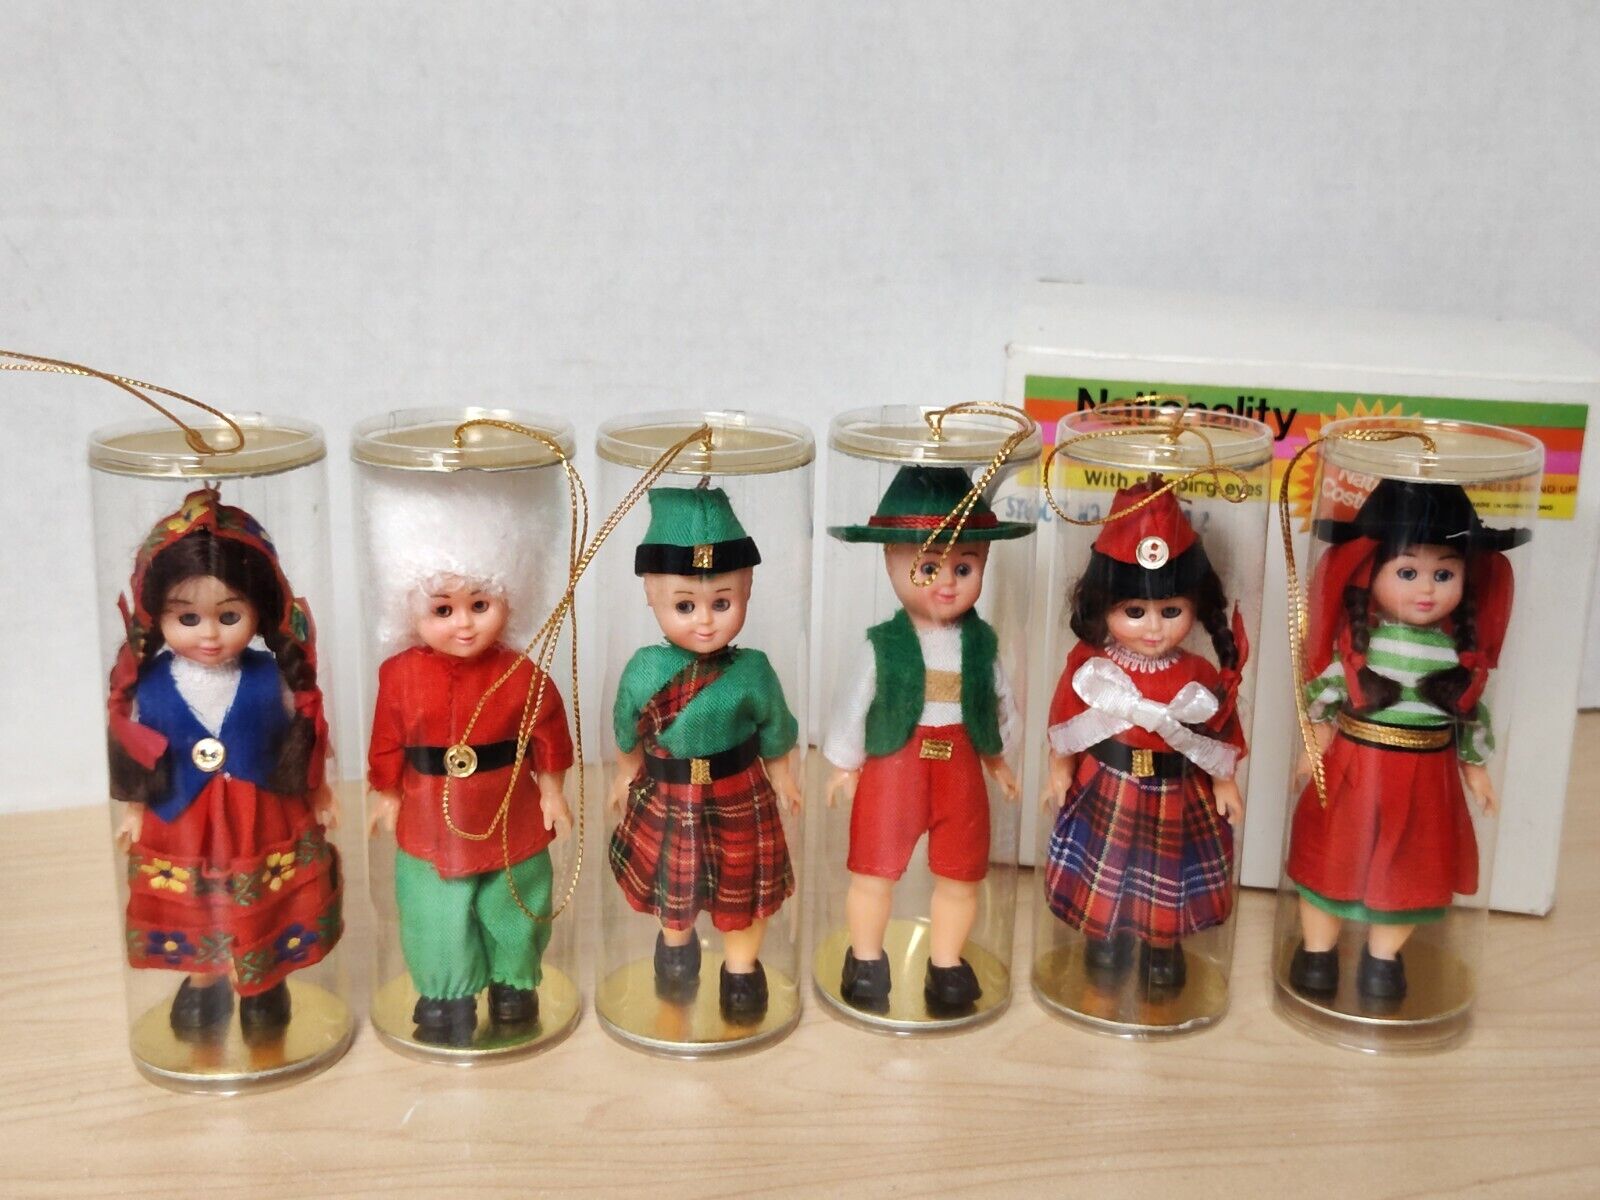 Vintage Nationality Dolls Ornaments, Full Box Of 6, NOS